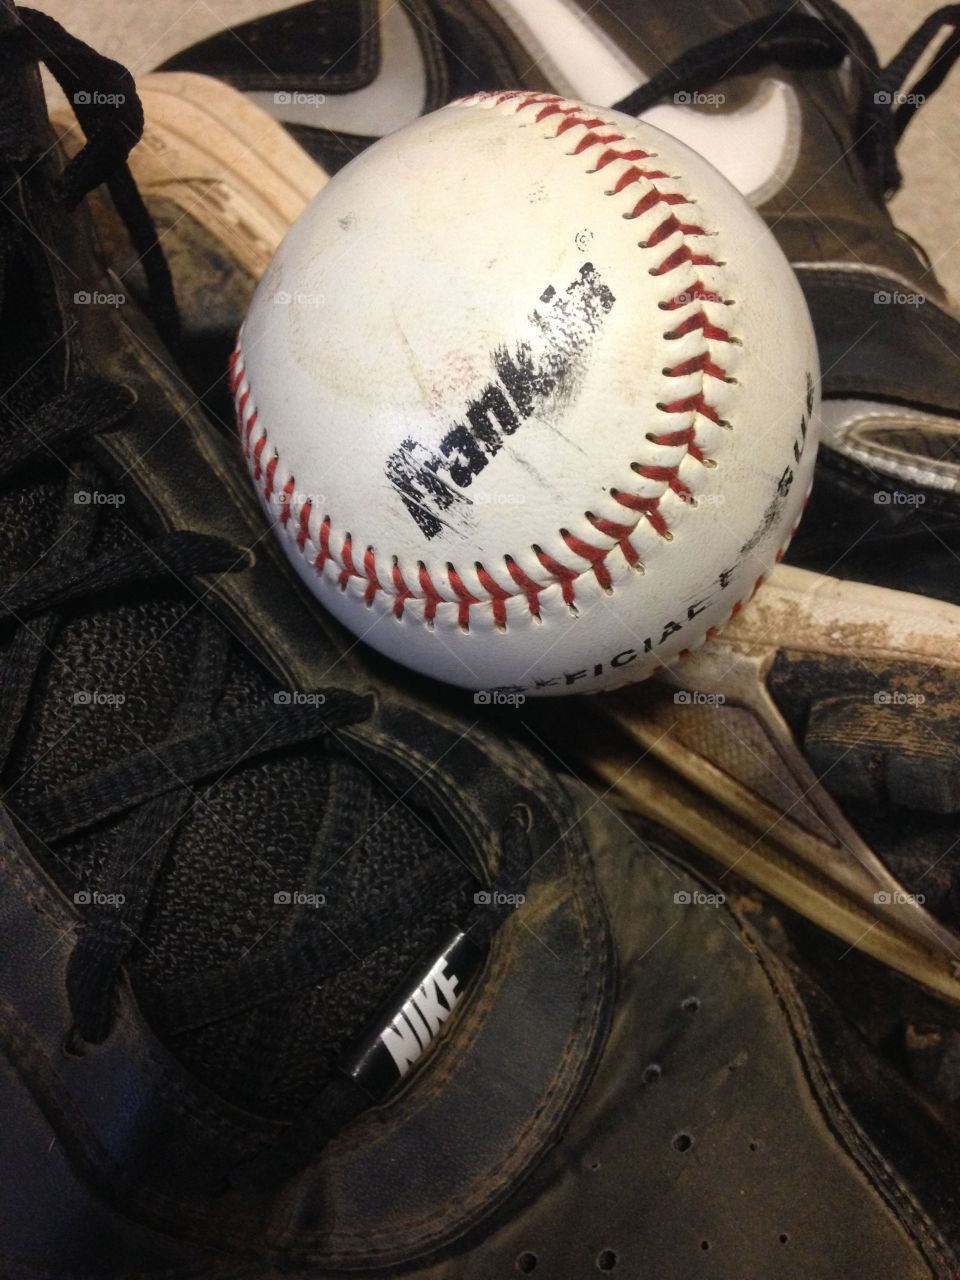 A well loved game. Baseball on top of well used baseball cleats